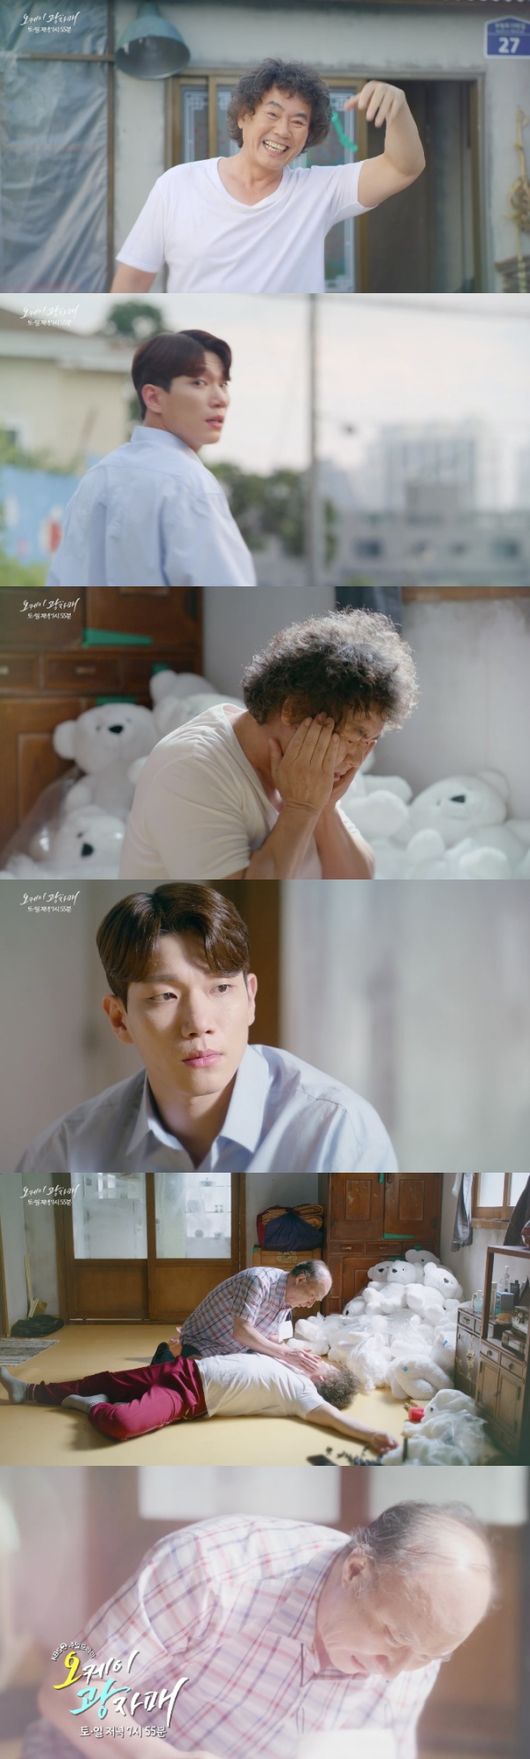 In OK Photon, a scene reminiscent of the Death of Actor Lee Byung-joon appeared as a preview, making drama fans nervous.In the 40th KBS 2TV weekend drama OK Photo Sisters (playplayed by Moon Young-nam, directed by Lee Jin-seo, abbreviated Photo Sisters) broadcast on the 14th, a scene suggesting the health abnormalities of Handolse (Lee Byung-joon) at the end of the broadcast appeared, shocking viewers.In the preview, Han Ye-seul (Kim Kyung-nam) mentioned his father Handolse and said, Why does my father look so old today? He will come to grill meat together.He also said, Why do not you fall so far today? I feel strange as if today is the last time.He was even caught following the fall of Handolse.While Handolse could not open his eyes as if he had lost consciousness, Lee Cheol-soo (Yoon Ju-sang) shouted Dolse-ya and added tension to whether he was suggesting his Death.In fact, Handol Se is not the first scene where a character who was active in photon sister is emerging.In the previous episode of Photo Sister, Shin Maria (Ha Jae-sook), who had a son and married against an affair by Bae Byung-ho (Choi Dae-cheol), suddenly died during her honeymoon and caused shock.Therefore, the listeners are watching whether the end of the year is the same as the new Maria.As Handol Ses son Han Ye-seul passes the audition qualifier in the play and marries Lee Kwang-sik (Jeon Hye-bin) to find happiness, a new turning point is expected.However, there was a lot of opposition from the audience regarding the exit due to the sudden Death of Shin Maria.Handol Se is also attracting attention to the story of photons who run toward the end of the Death to get off with rebellion.Phone is a mystery thriller melodrama home drama that begins when all the family members are identified as murder suspects in the murder of their mother during their parents divorce lawsuit.It is the work of Moon Young-nam, who wrote Rosy Life, The Rumorous Chilgongju, and Whats the Feng Sang and broadcasts every Saturday and Sunday at 7:55 pm.KBS is provided.